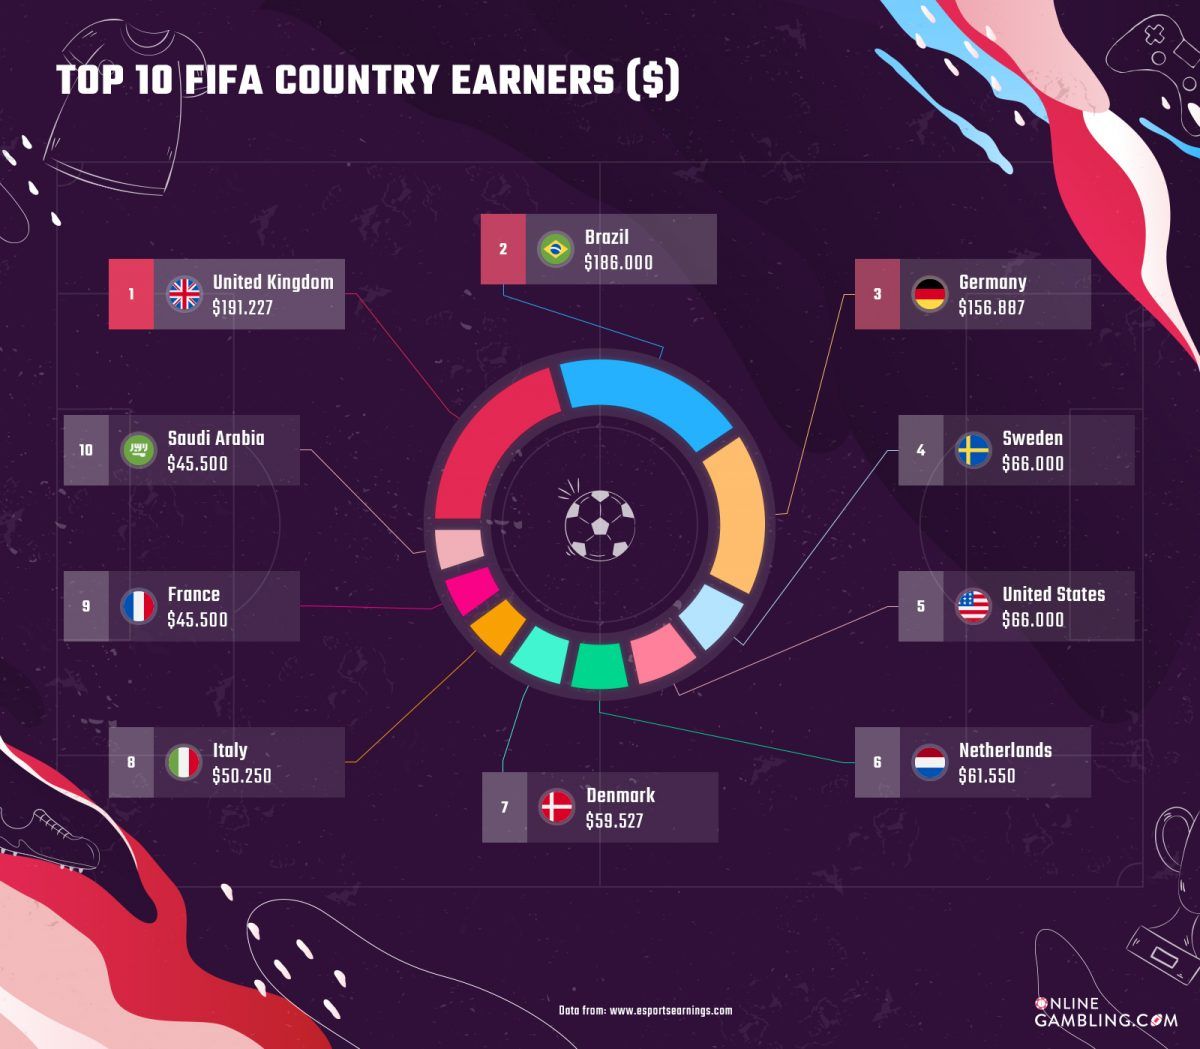 Top FIFA players by country